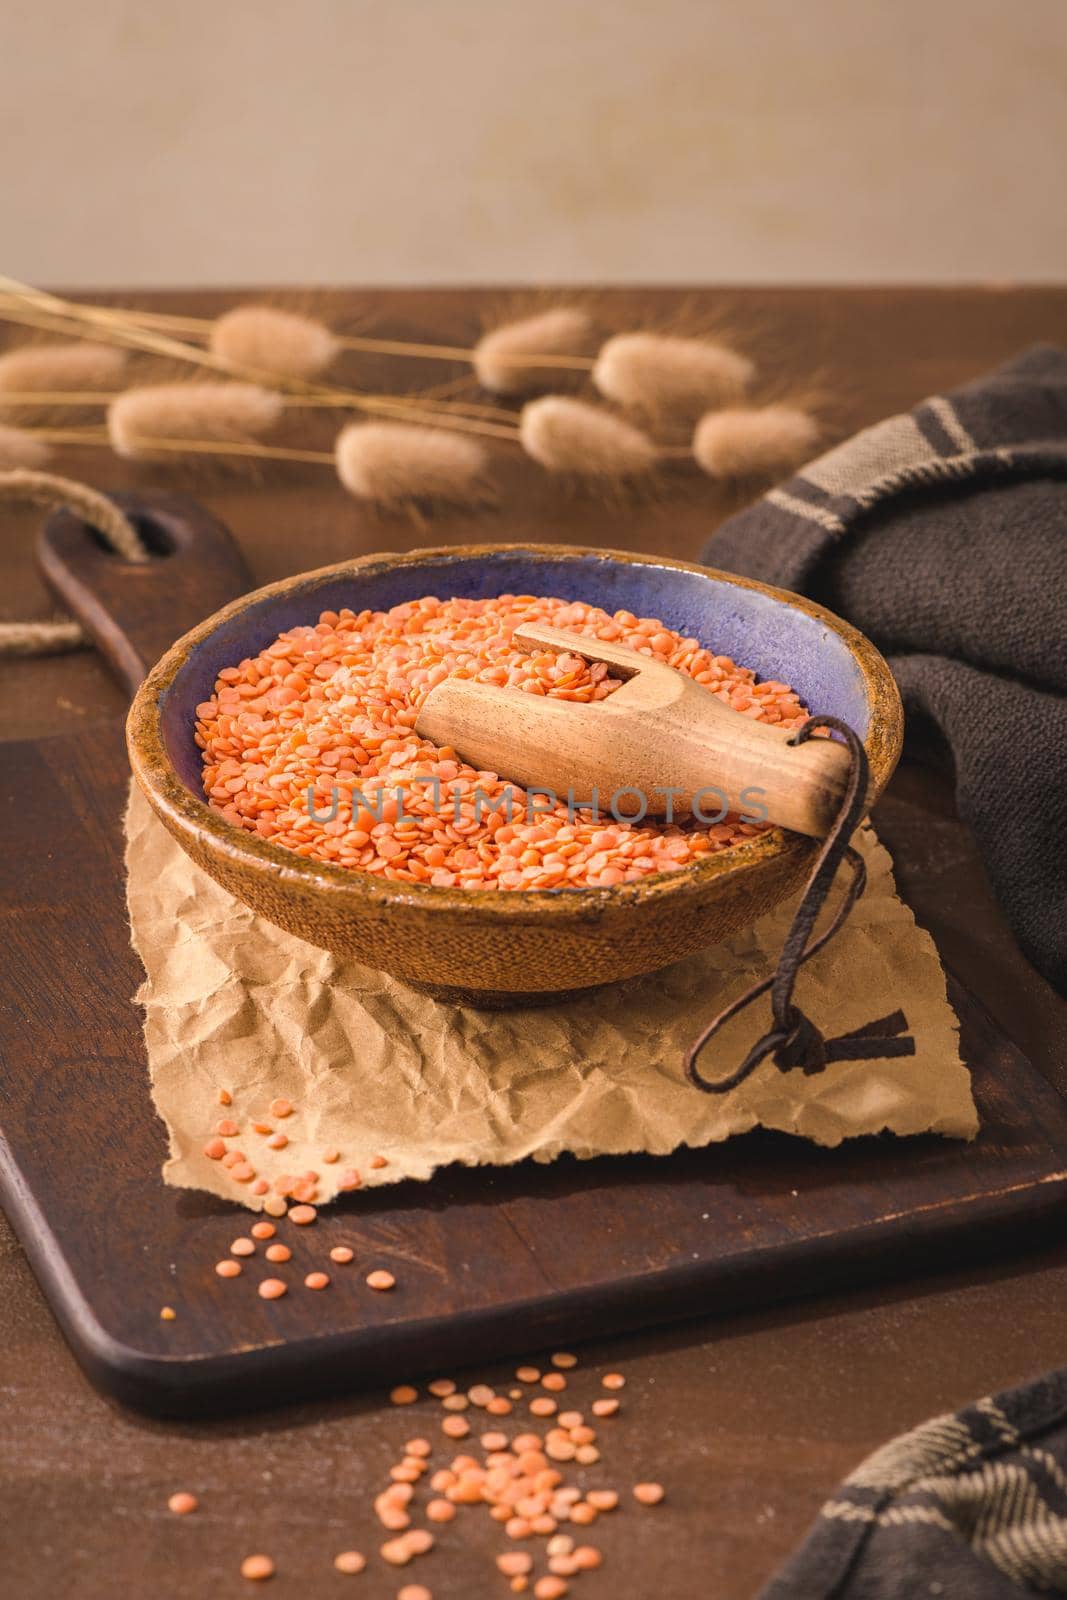 Red lentils in a ceramic bowl with a wooden scoop on a kitchen countertop.